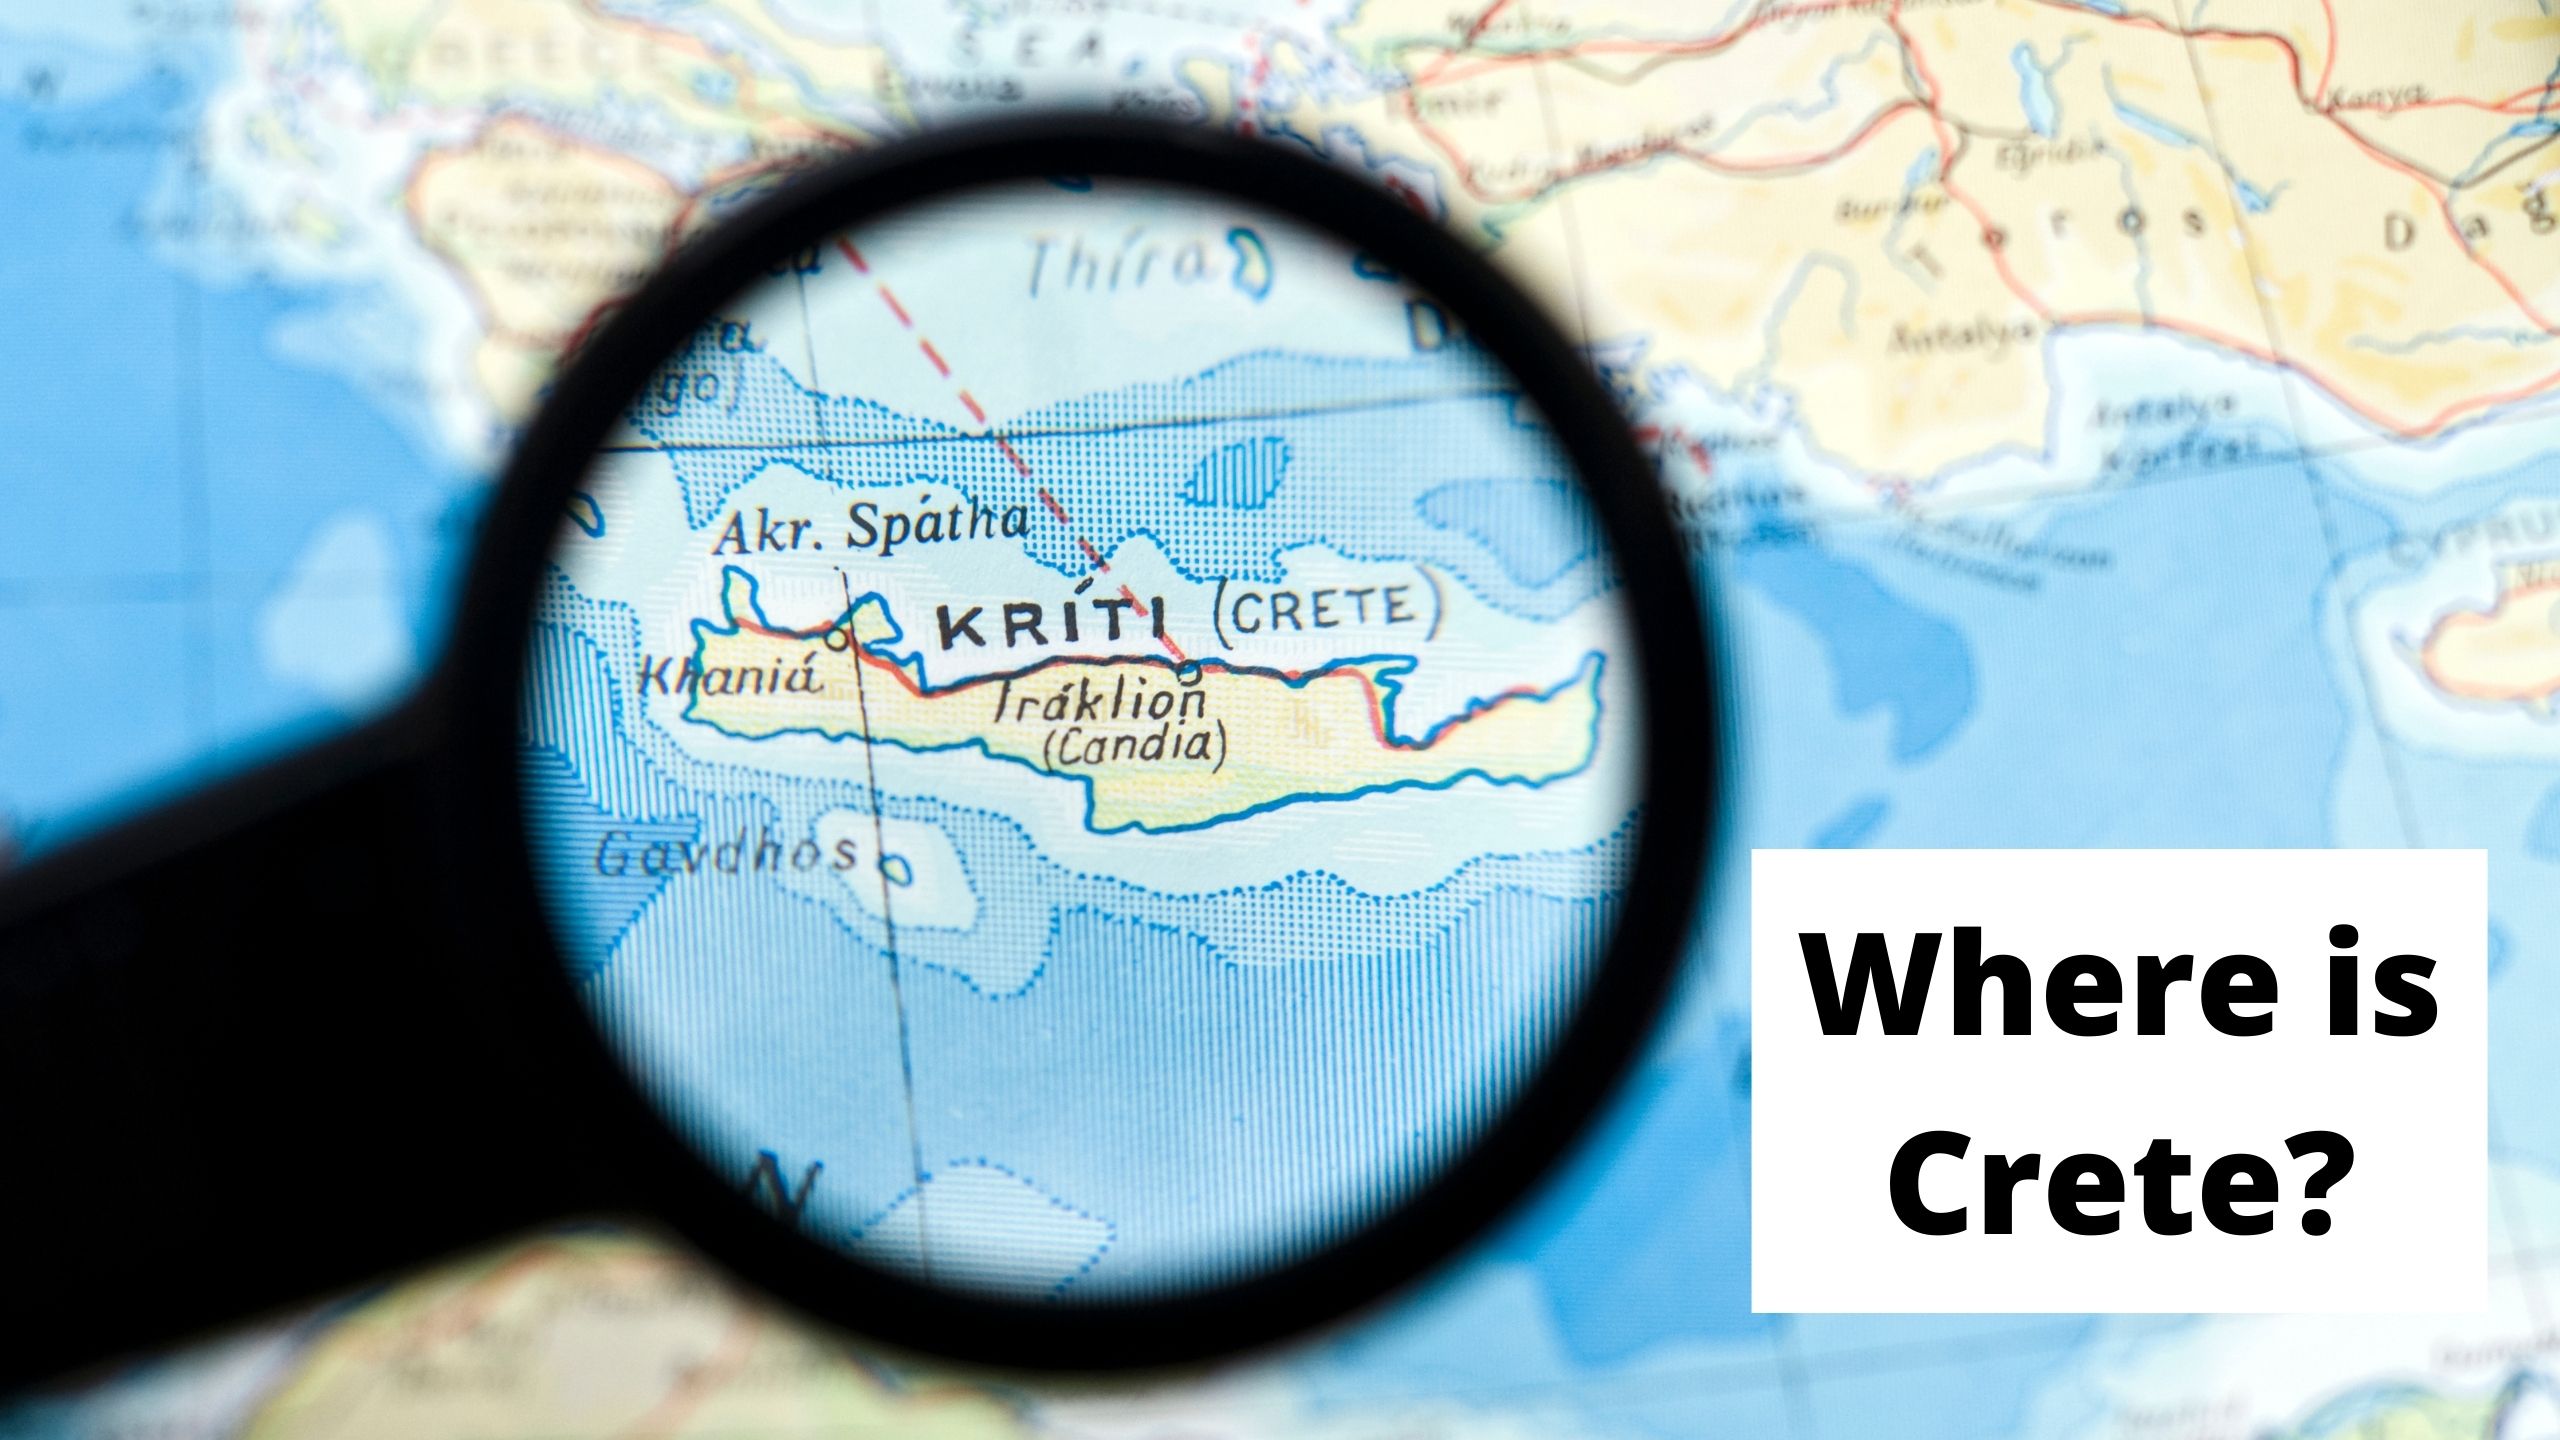 Finding Crete on the map